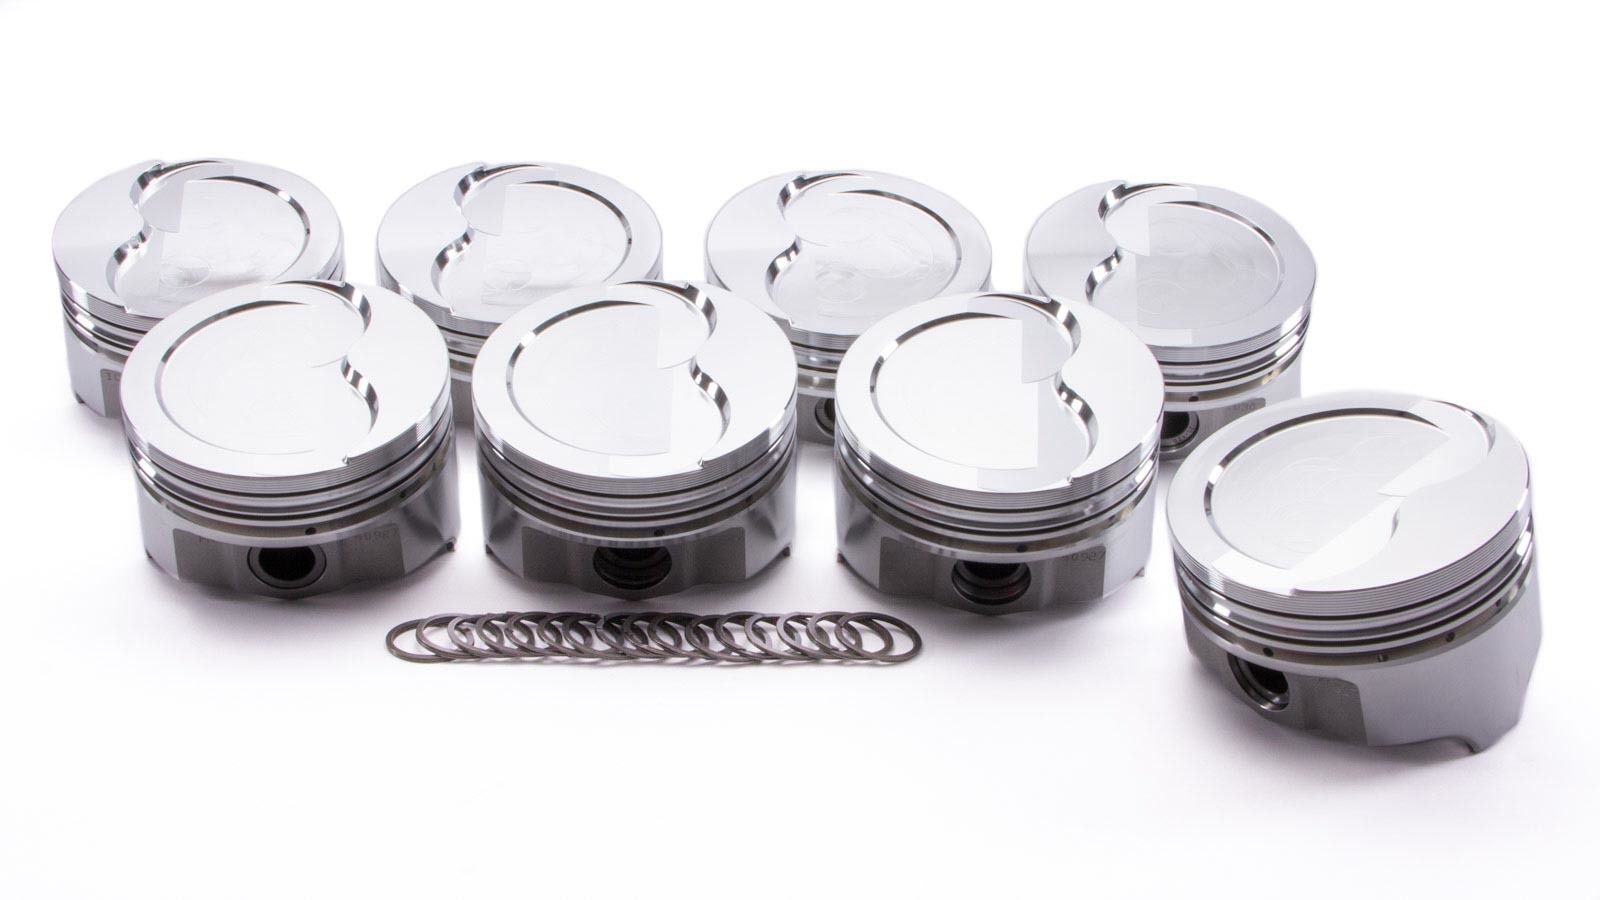 Icon Pistons IC887.030 Piston, Premium Forged, Forged, 4.156 in Bore, 1/16 x 1/16 x 3/16 in Ring Grooves, Minus 25.00 cc, Oldsmobile V8, Set of 8